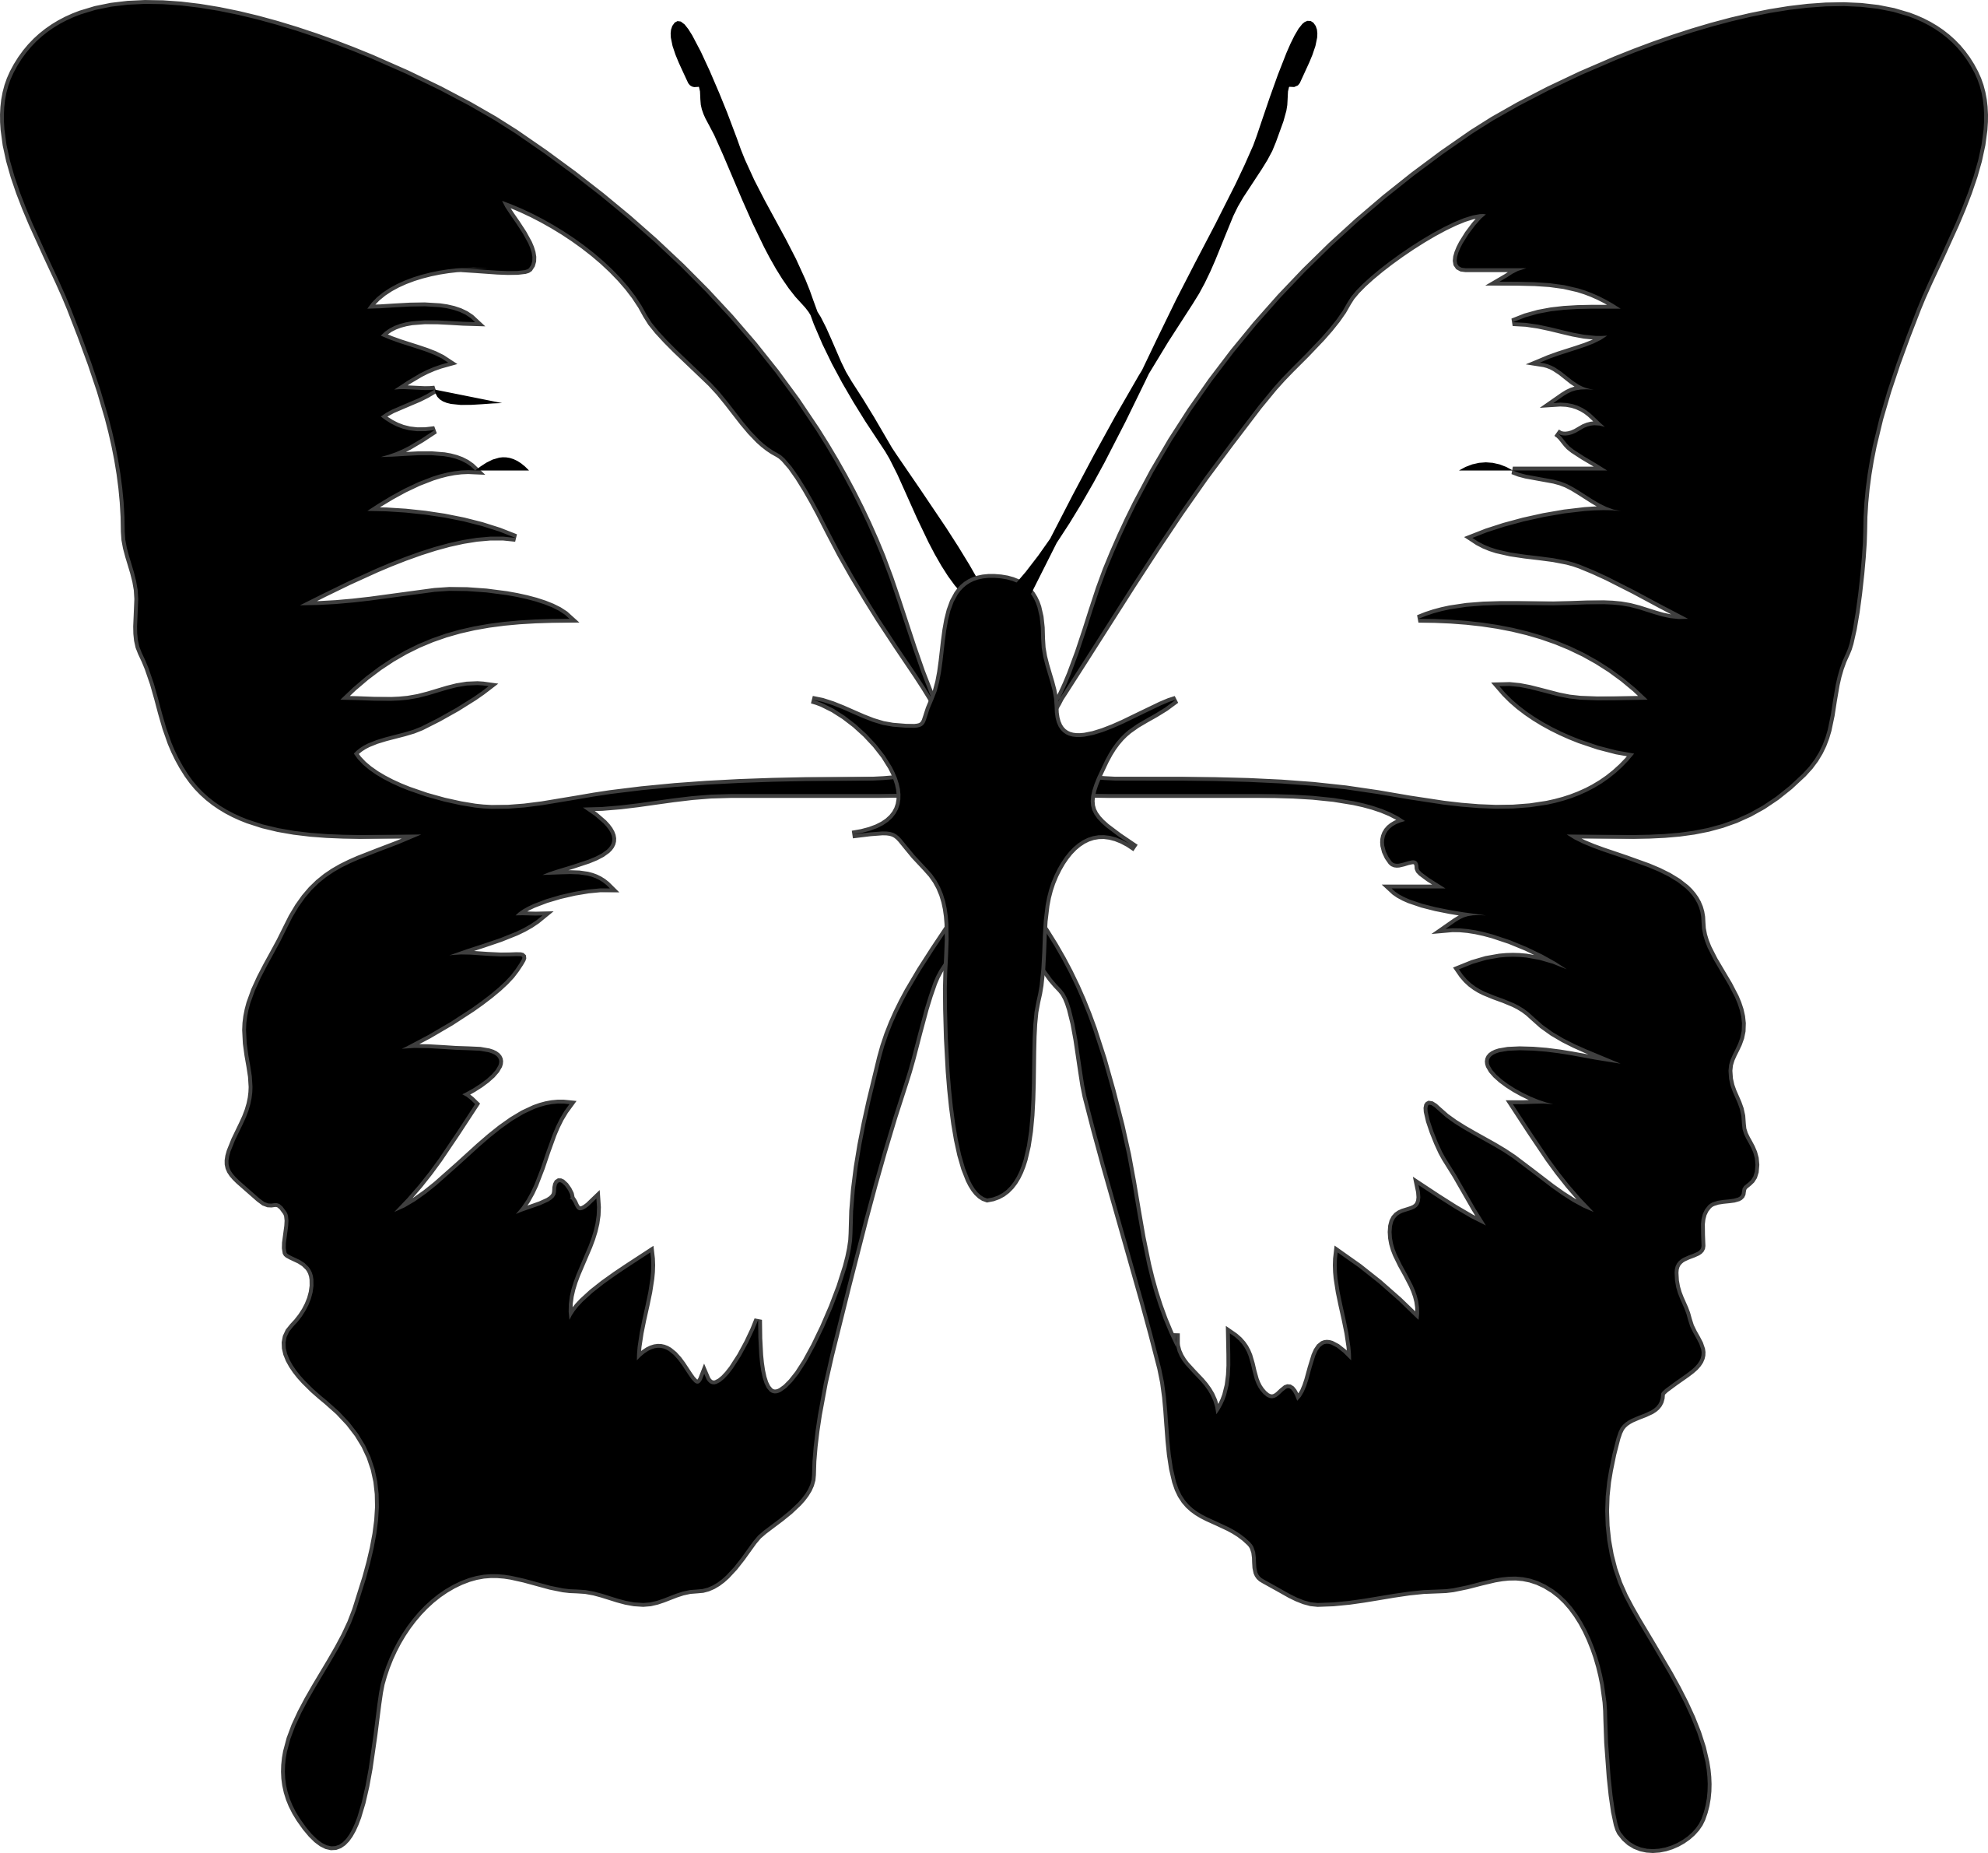 Hand clipart butterfly. Clip art black and